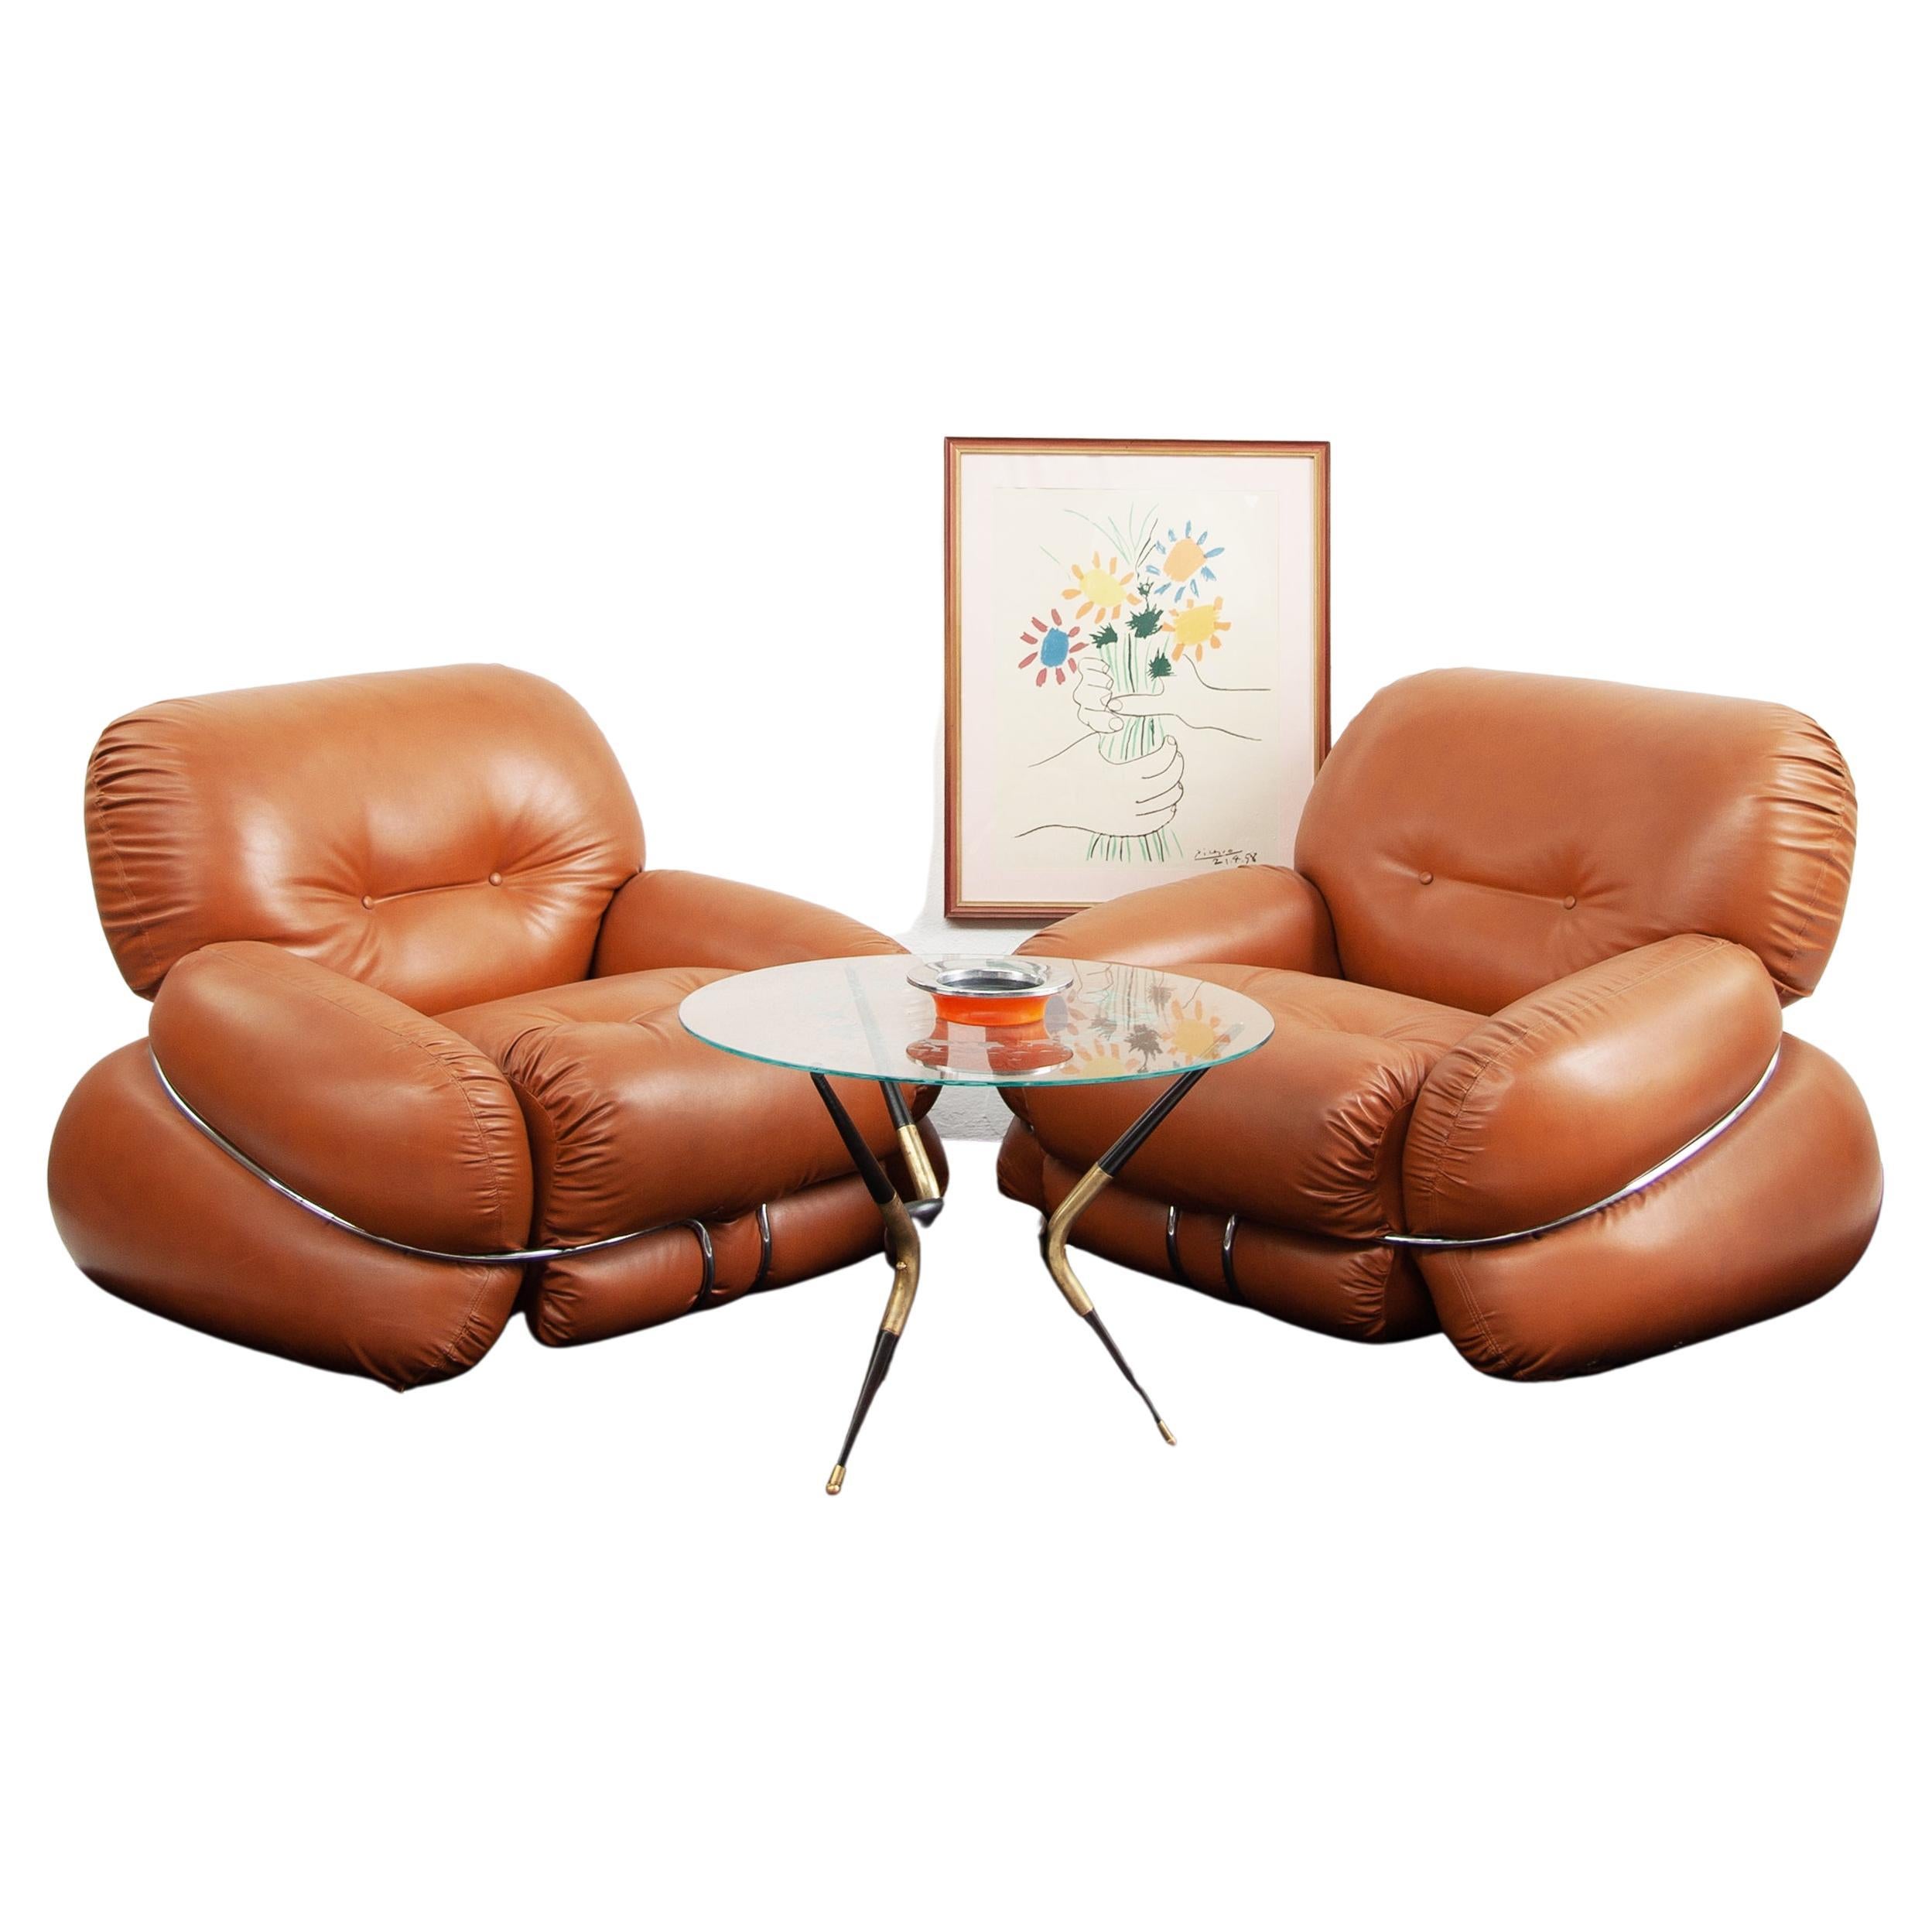 Set of 2 "Okay" Lounge Armchairs by Adriano Piazzesi